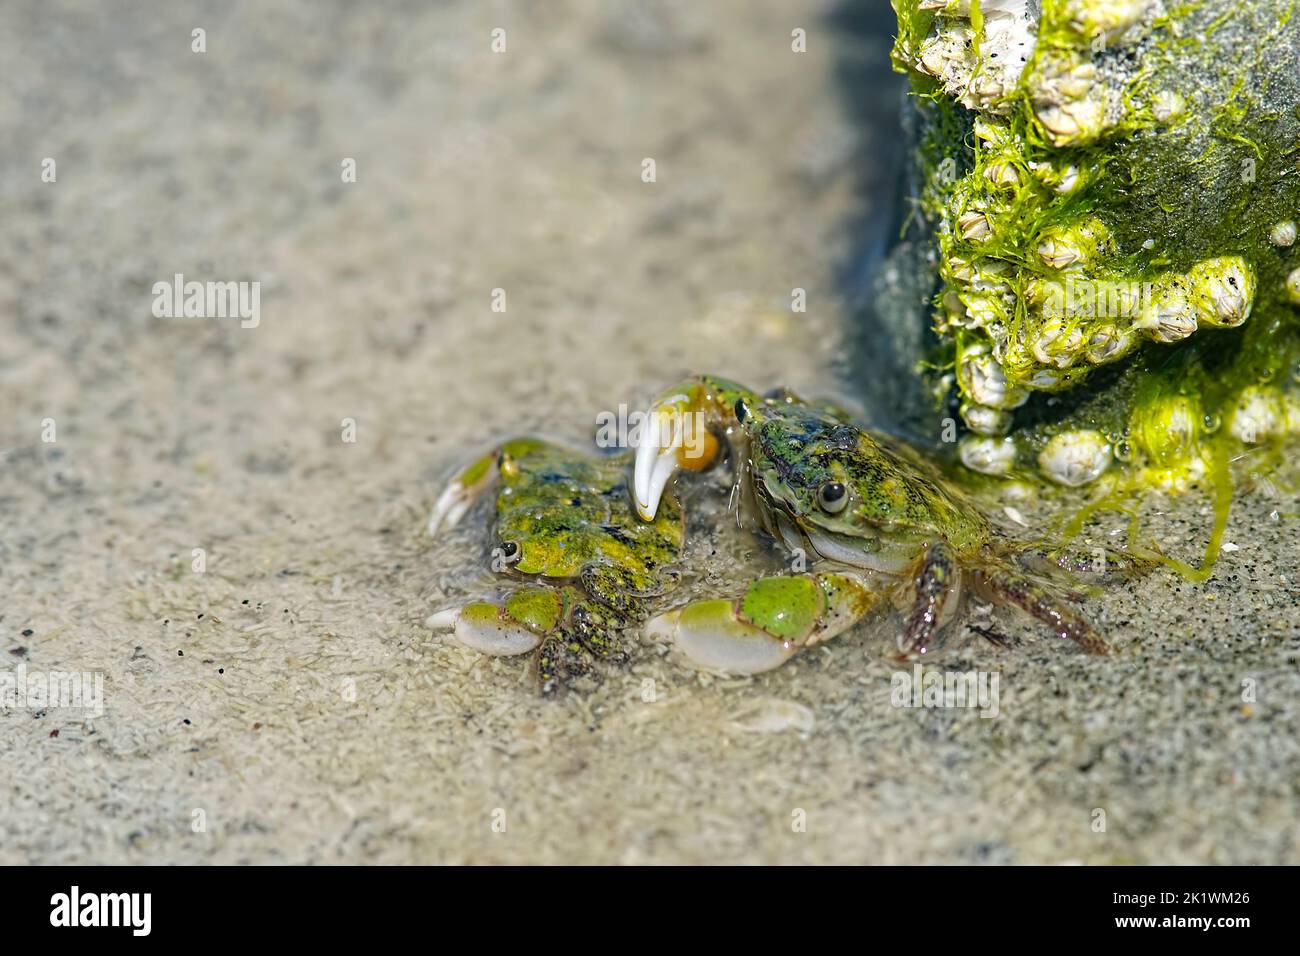 A pair of Green Shore Crabs or Hairy Crabs (Hemigrapsus oregonensis) in the mudflats off of Vancouver Island, British Columbia, Canada. Stock Photo